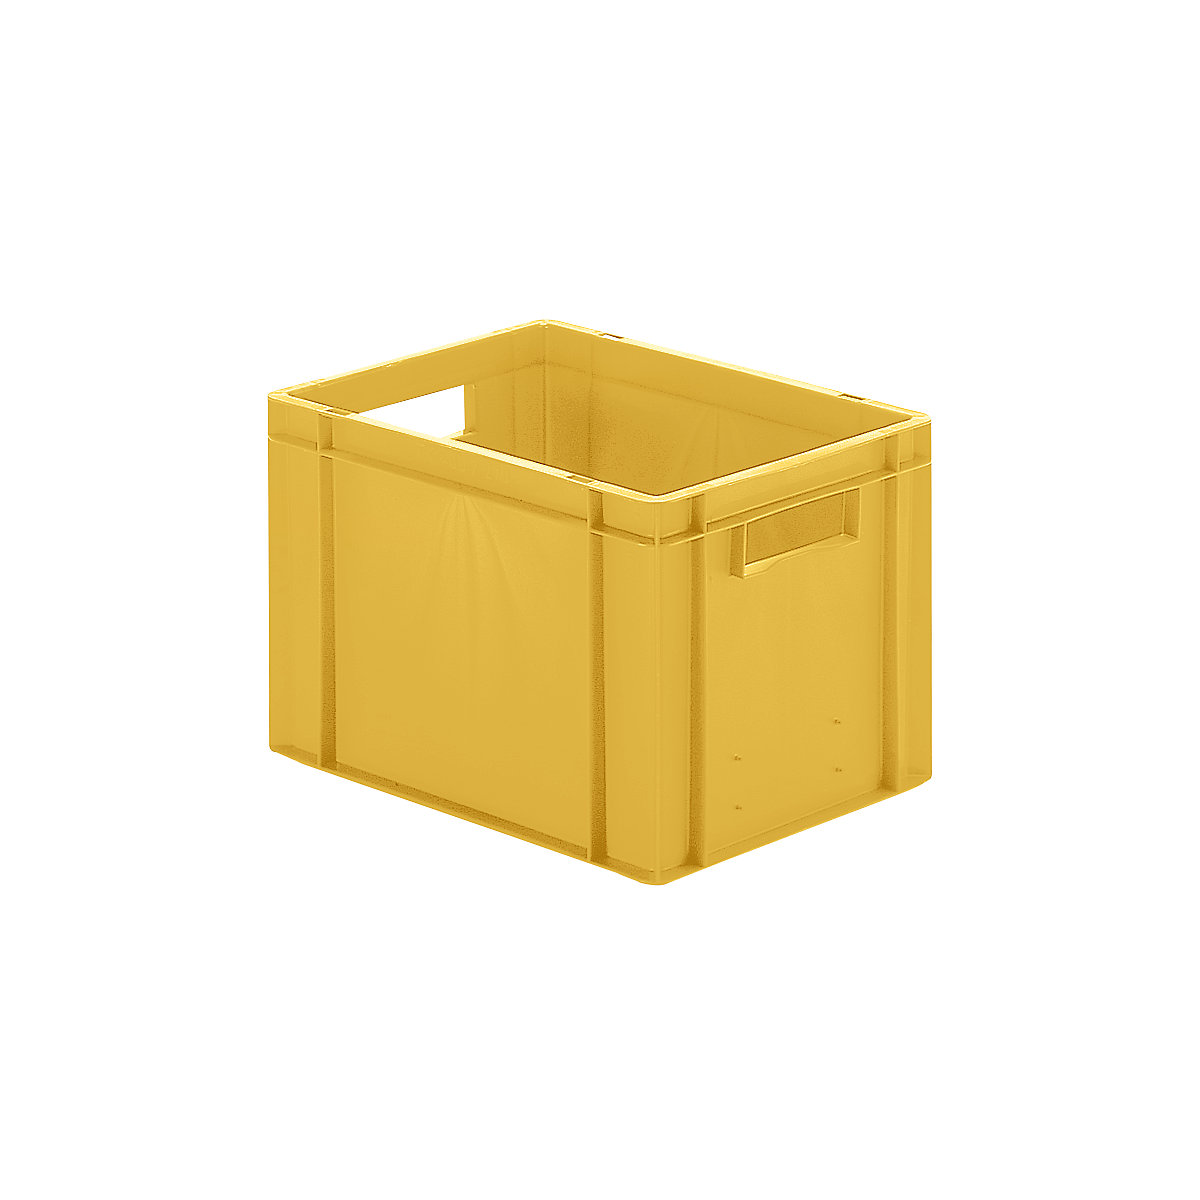 Euro stacking container, closed walls and base, LxWxH 400 x 300 x 270 mm, yellow, pack of 5